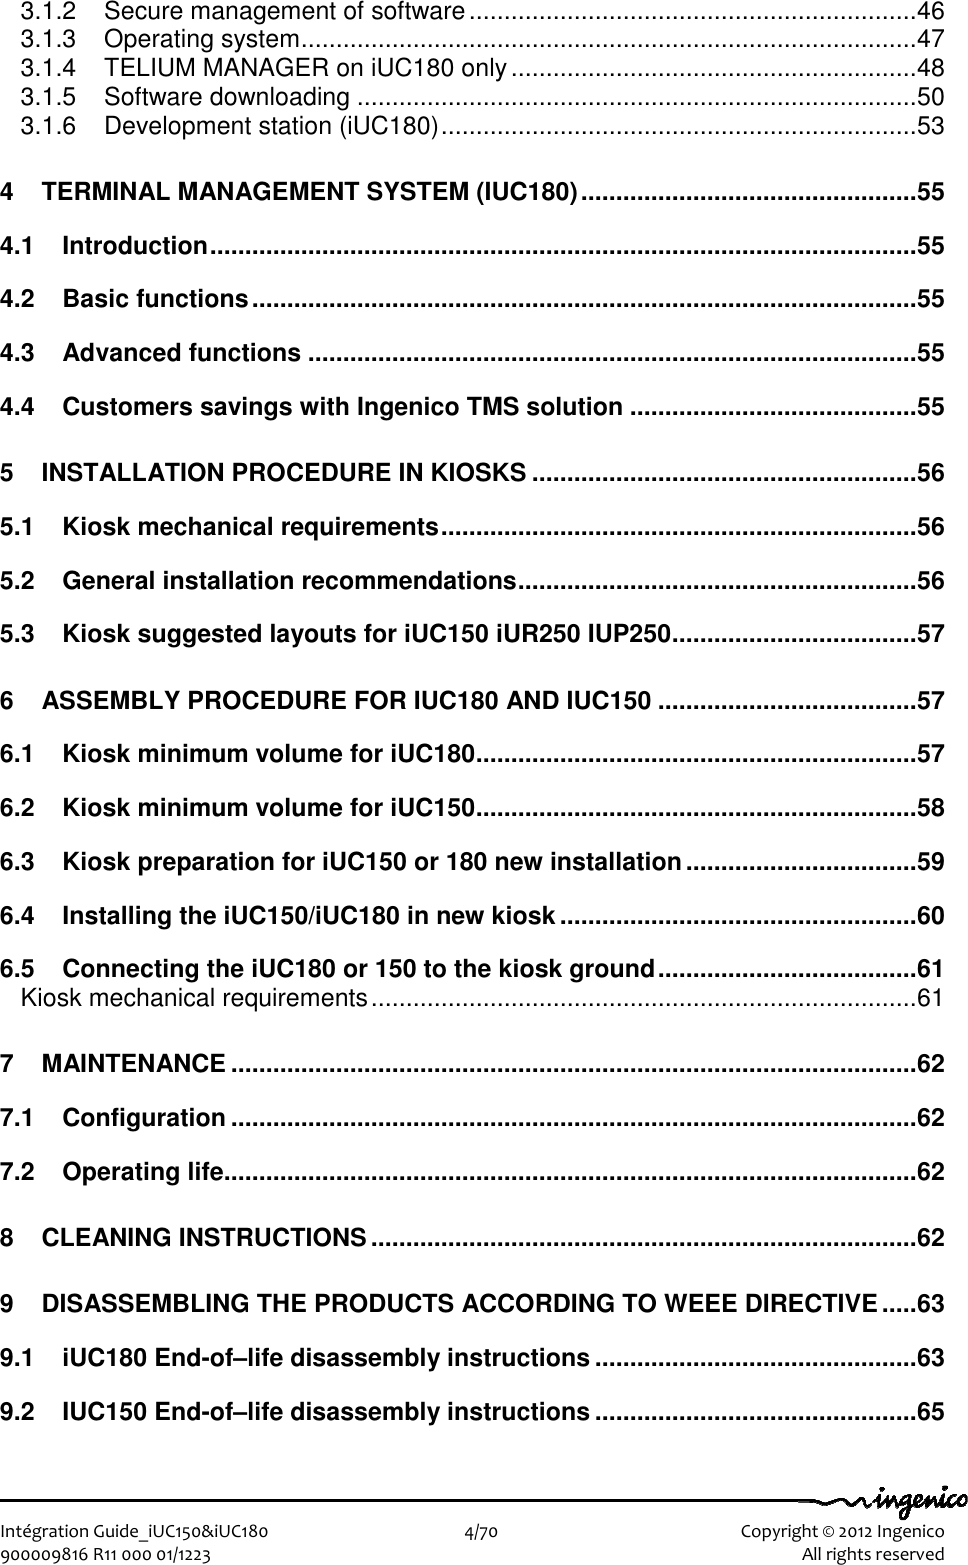   Intégration Guide_iUC150&amp;iUC180                        4/70    Copyright © 2012 Ingenico 900009816 R11 000 01/1223    All rights reserved 3.1.2 Secure management of software................................................................46 3.1.3 Operating system........................................................................................47 3.1.4 TELIUM MANAGER on iUC180 only..........................................................48 3.1.5 Software downloading ................................................................................50 3.1.6 Development station (iUC180)....................................................................53 4 TERMINAL MANAGEMENT SYSTEM (IUC180)................................................55 4.1 Introduction.....................................................................................................55 4.2 Basic functions...............................................................................................55 4.3 Advanced functions .......................................................................................55 4.4 Customers savings with Ingenico TMS solution .........................................55 5 INSTALLATION PROCEDURE IN KIOSKS .......................................................56 5.1 Kiosk mechanical requirements....................................................................56 5.2 General installation recommendations.........................................................56 5.3 Kiosk suggested layouts for iUC150 iUR250 IUP250...................................57 6 ASSEMBLY PROCEDURE FOR IUC180 AND IUC150 .....................................57 6.1 Kiosk minimum volume for iUC180...............................................................57 6.2 Kiosk minimum volume for iUC150...............................................................58 6.3 Kiosk preparation for iUC150 or 180 new installation.................................59 6.4 Installing the iUC150/iUC180 in new kiosk ...................................................60 6.5 Connecting the iUC180 or 150 to the kiosk ground.....................................61 Kiosk mechanical requirements..............................................................................61 7 MAINTENANCE ..................................................................................................62 7.1 Configuration ..................................................................................................62 7.2 Operating life...................................................................................................62 8 CLEANING INSTRUCTIONS..............................................................................62 9 DISASSEMBLING THE PRODUCTS ACCORDING TO WEEE DIRECTIVE.....63 9.1 iUC180 End-of–life disassembly instructions ..............................................63 9.2 IUC150 End-of–life disassembly instructions ..............................................65 